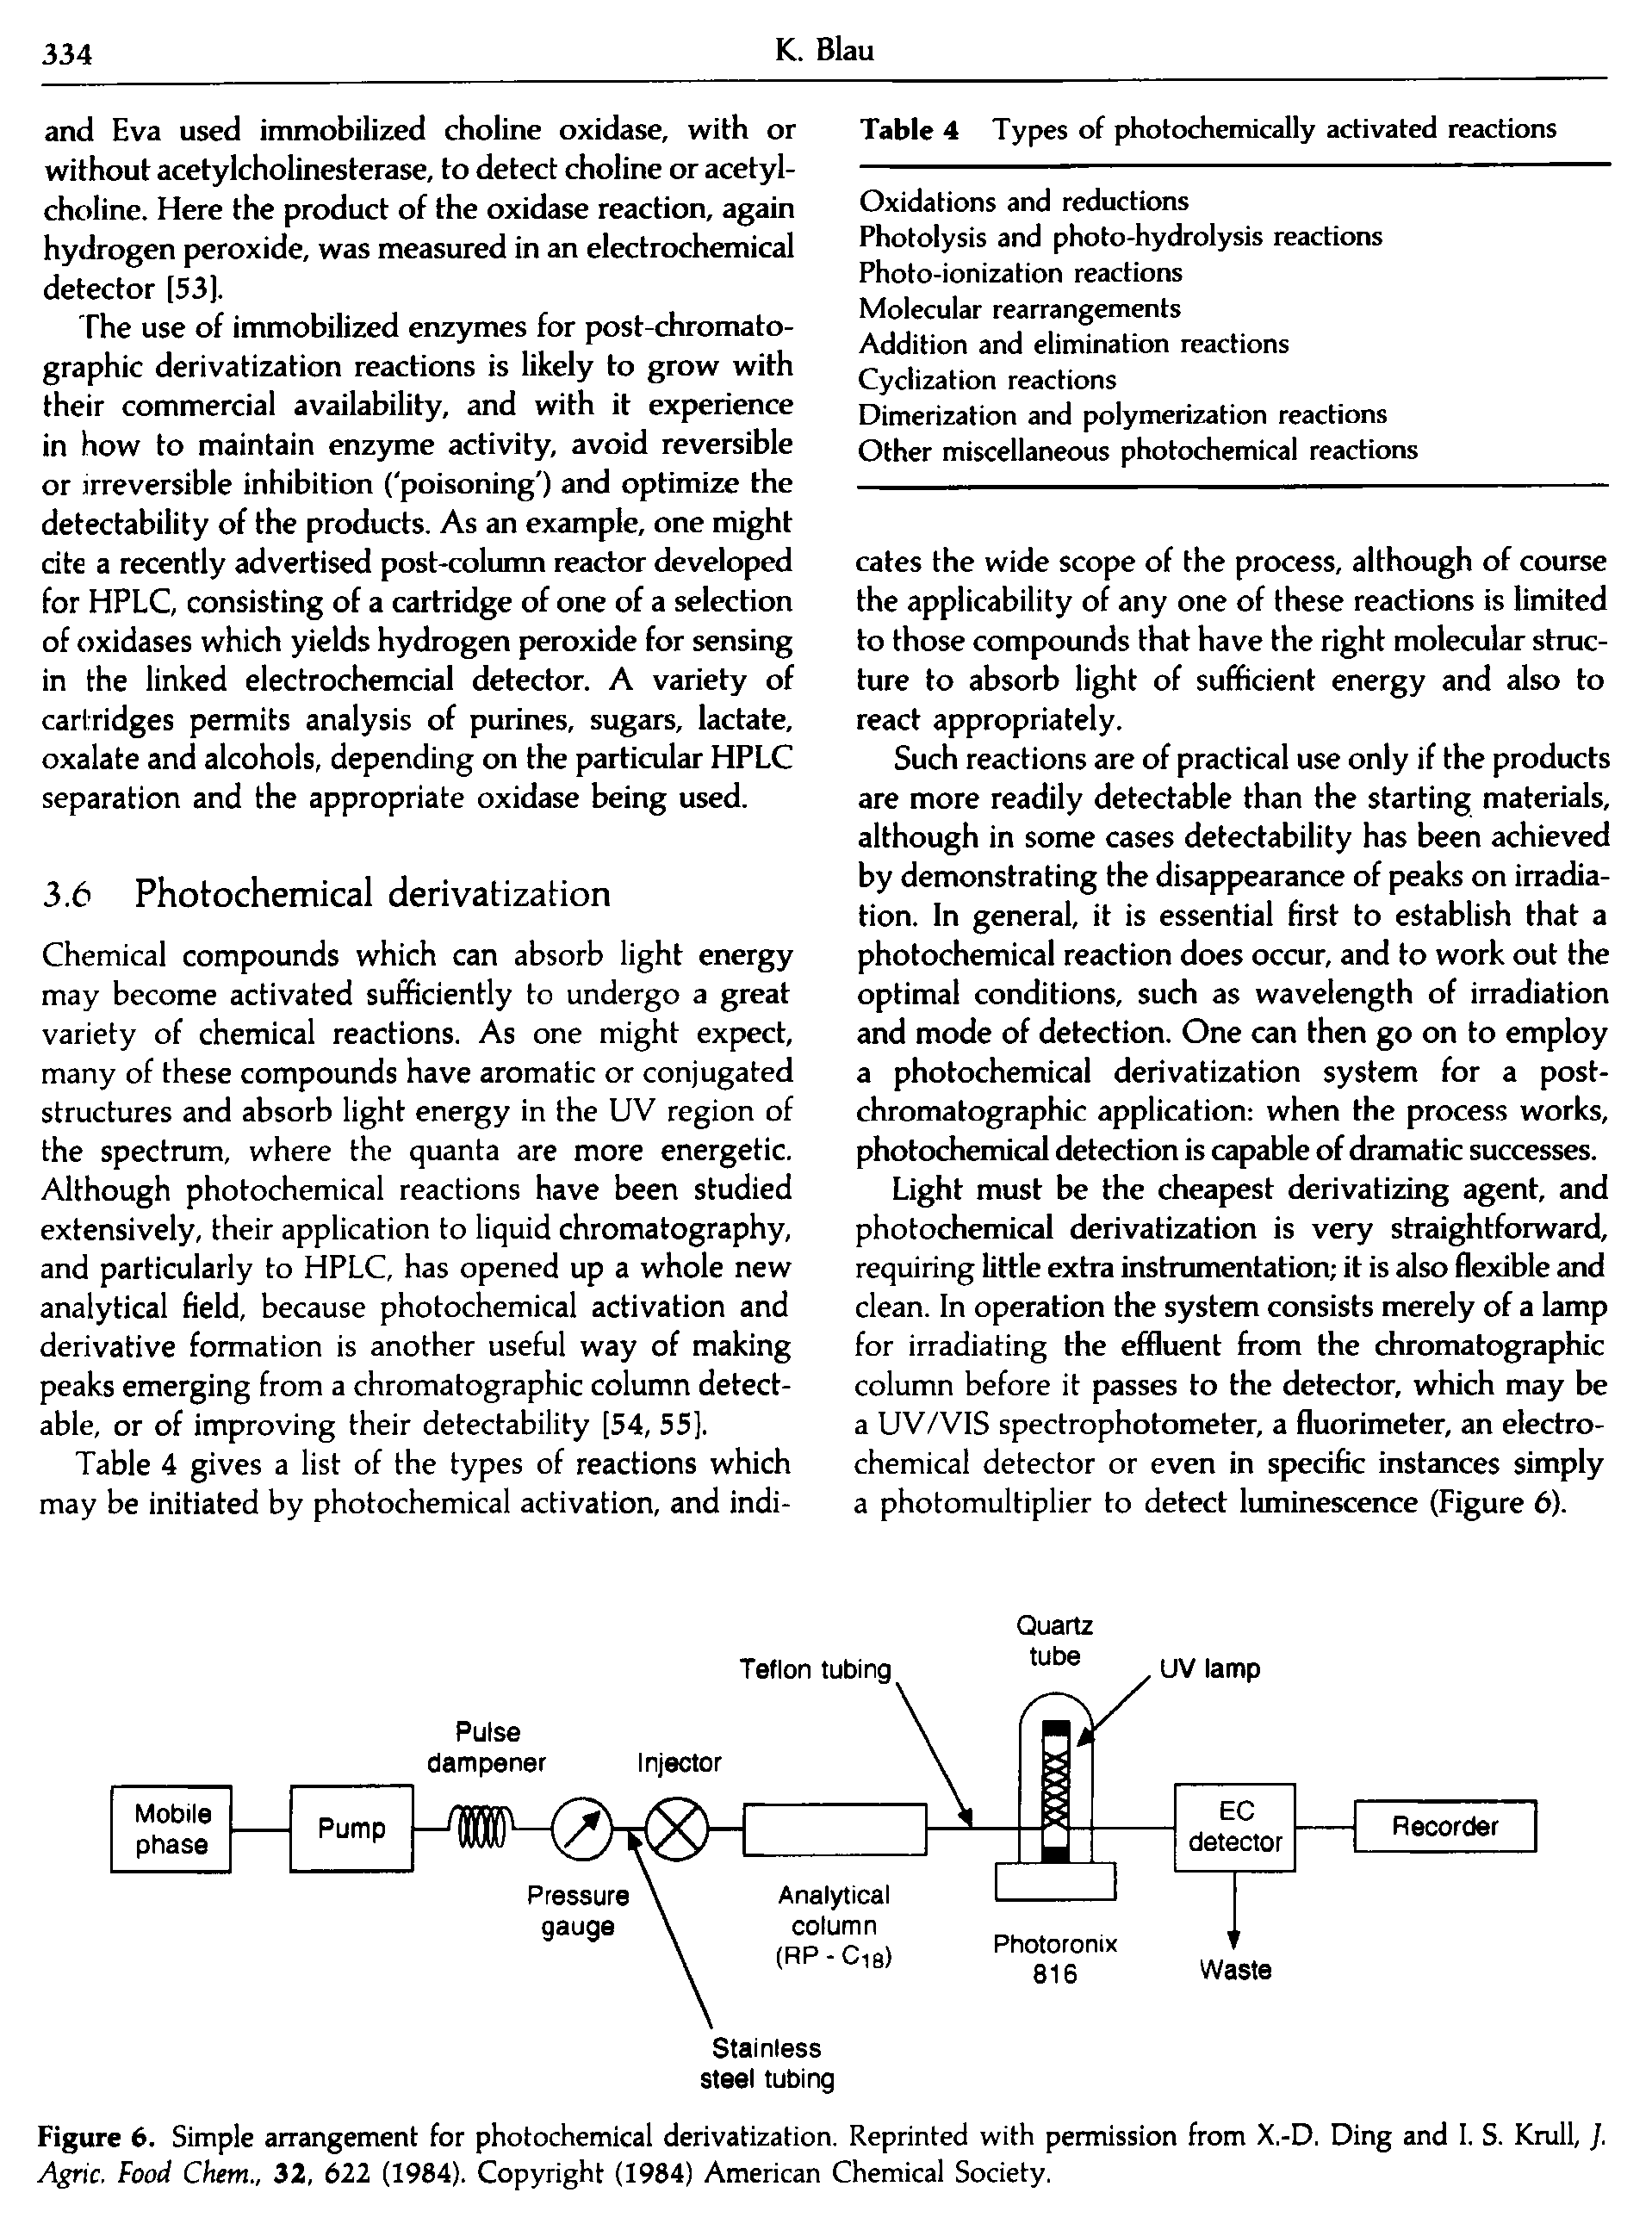 Figure 6. Simple arrangement for photochemical derivatization. Reprinted with permission from X.-D. Ding and I. S. Krull, ]. Agric. Food Chem., 32, 622 (1984). Copyright (1984) American Chemical Society.